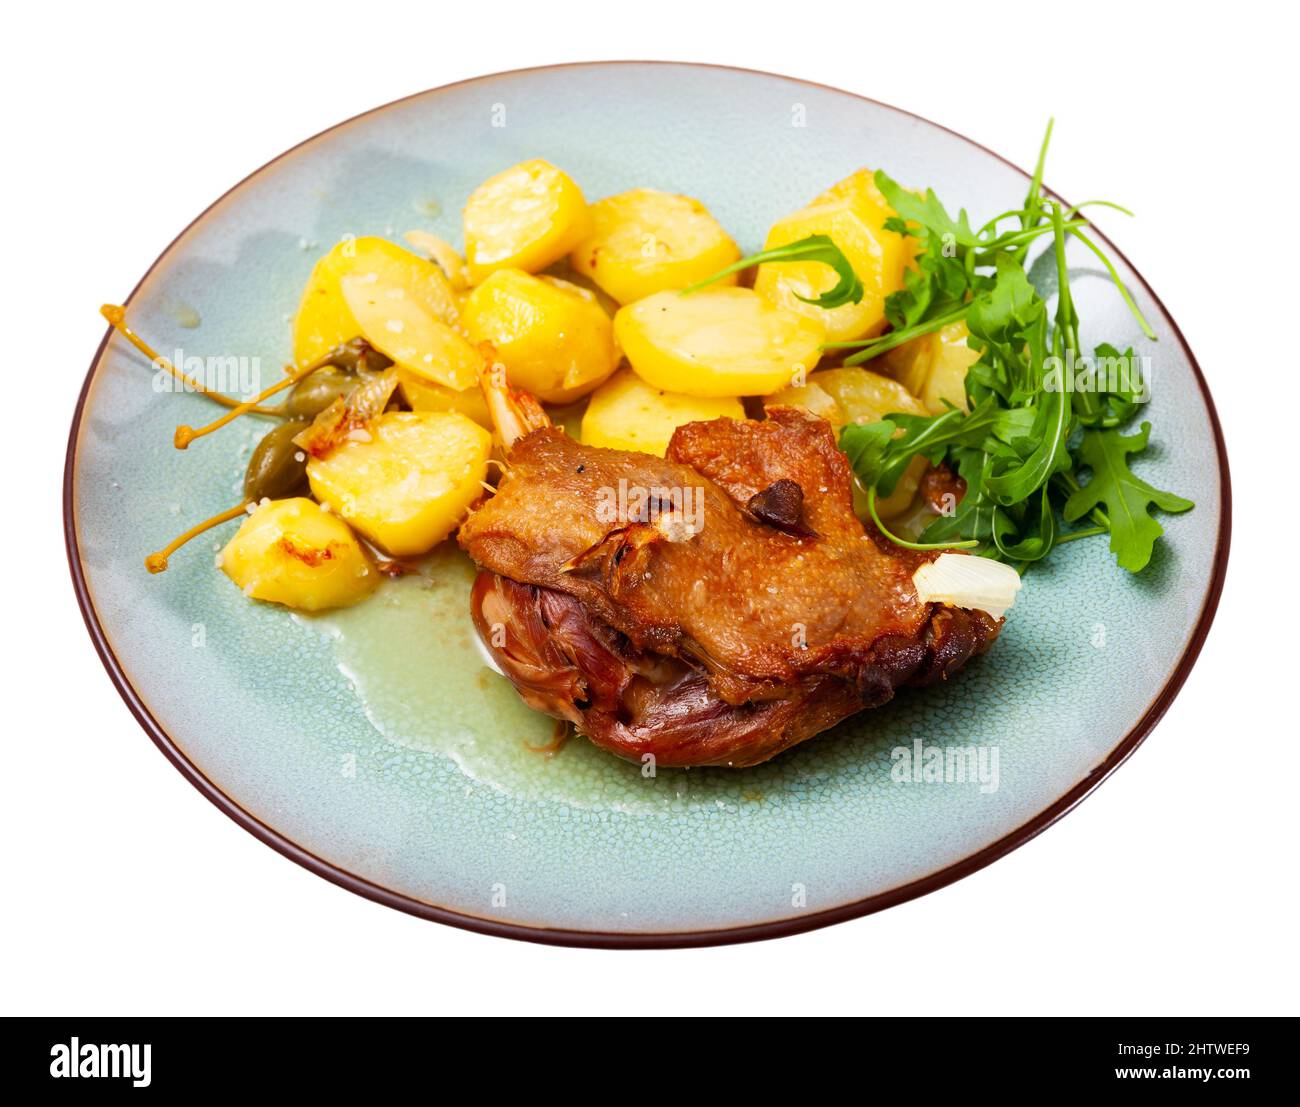 Fried duck confit with roasted potatoes Stock Photo